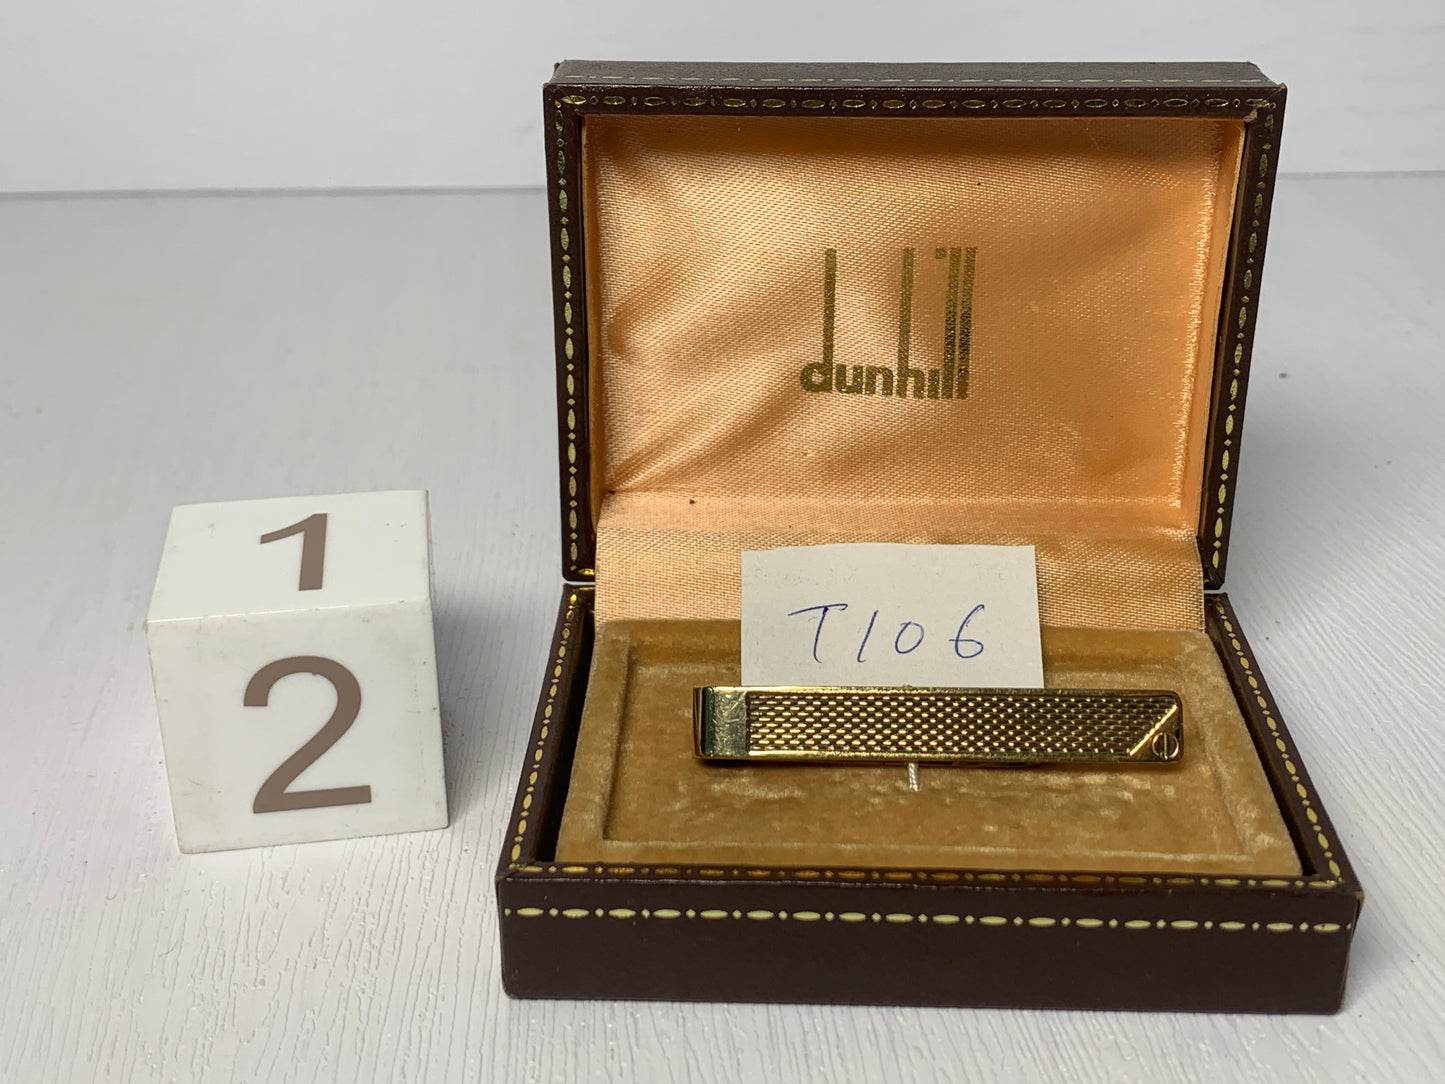 Vintage Gold tone Tie clip dunhill  cufflinks with box  - 3MAR